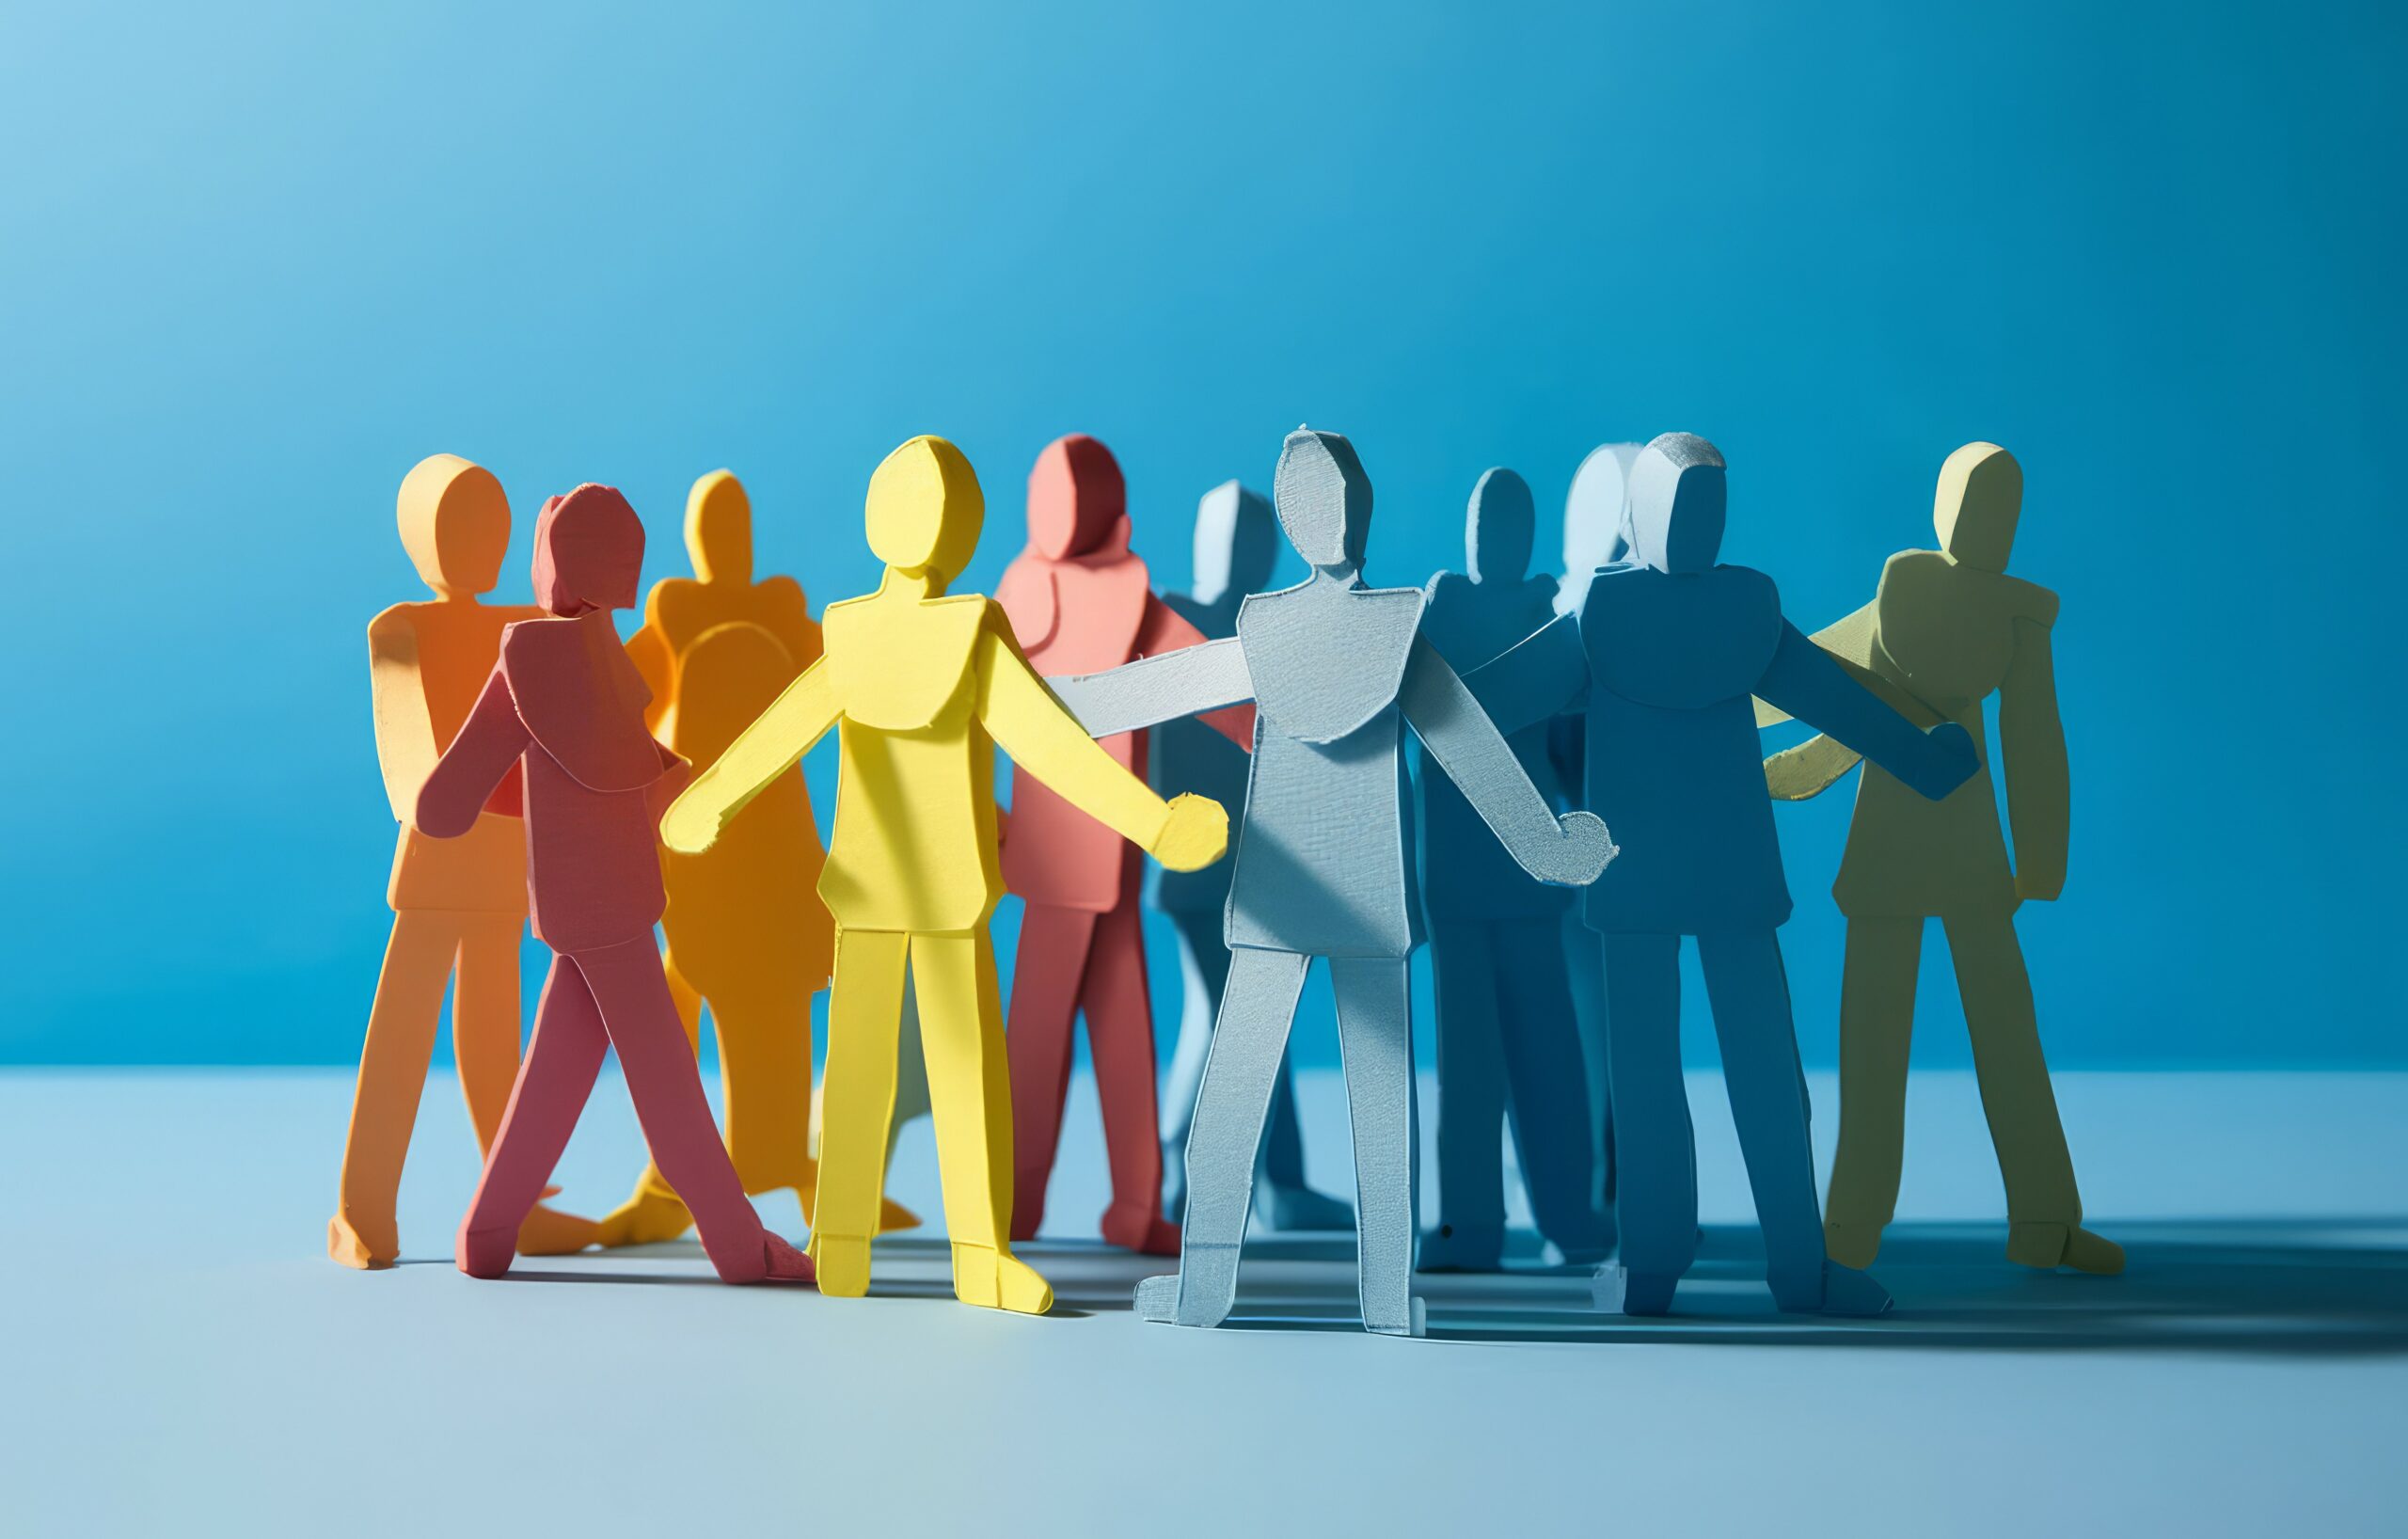 A group of paper people coming together. Community and friendship concept